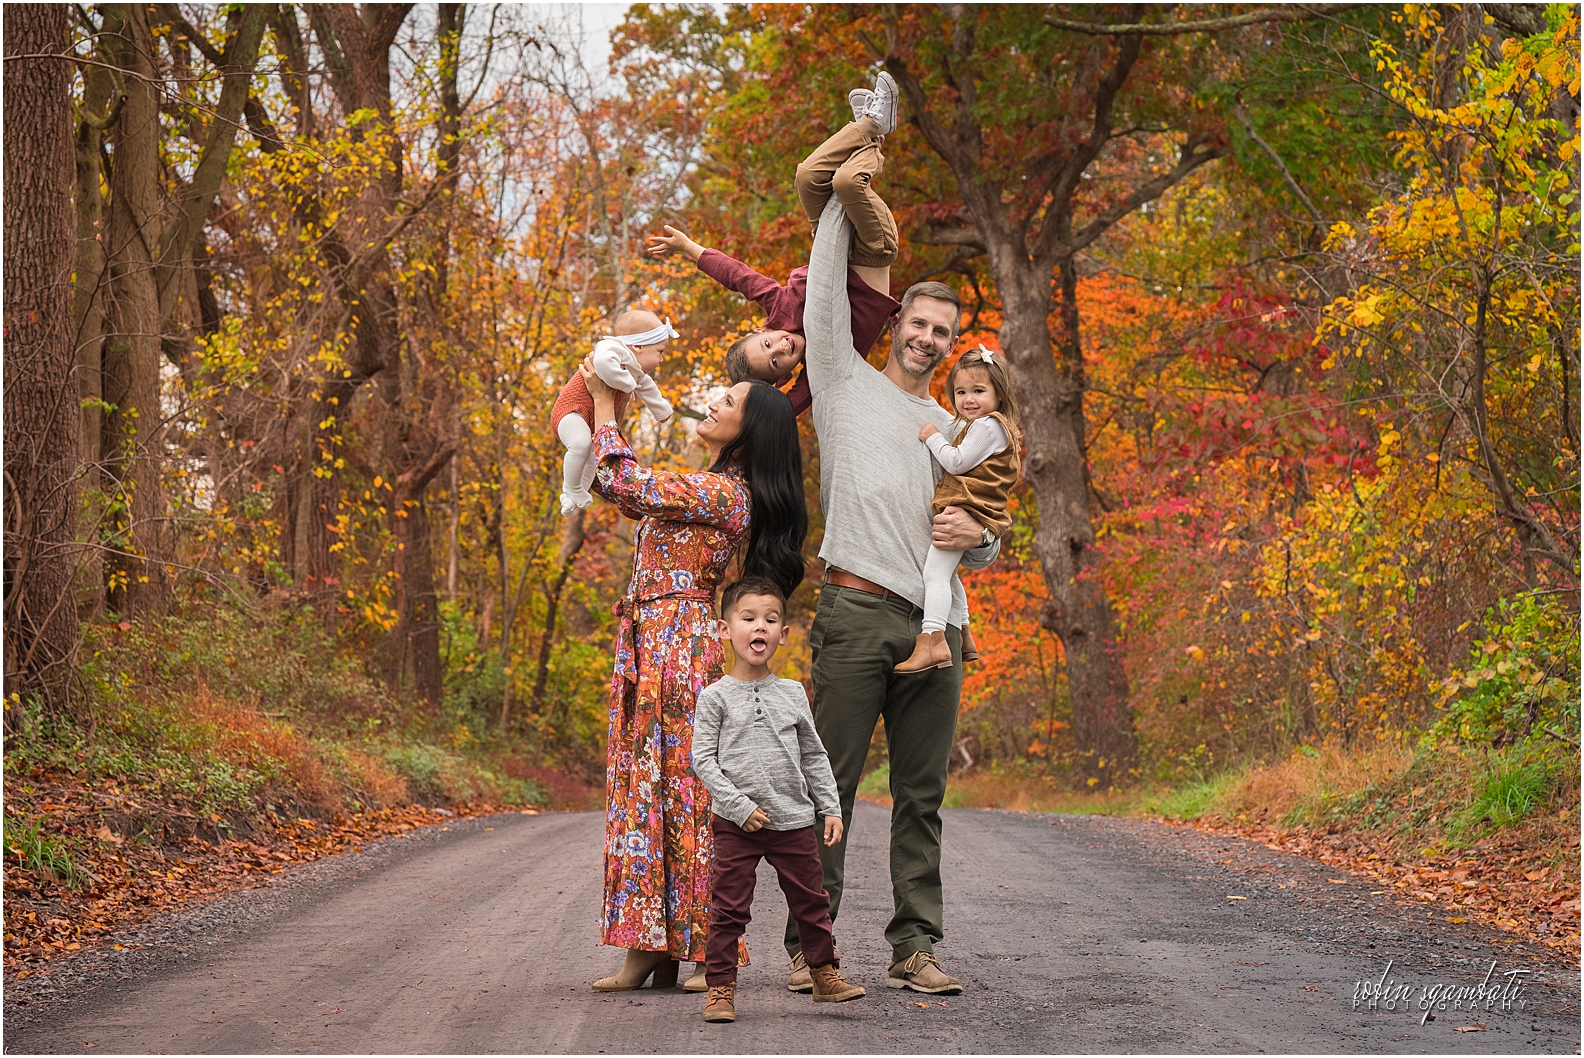 Fall 2020 Lifestyle Family Sessions Wrap up | Robin Sgambati Photography